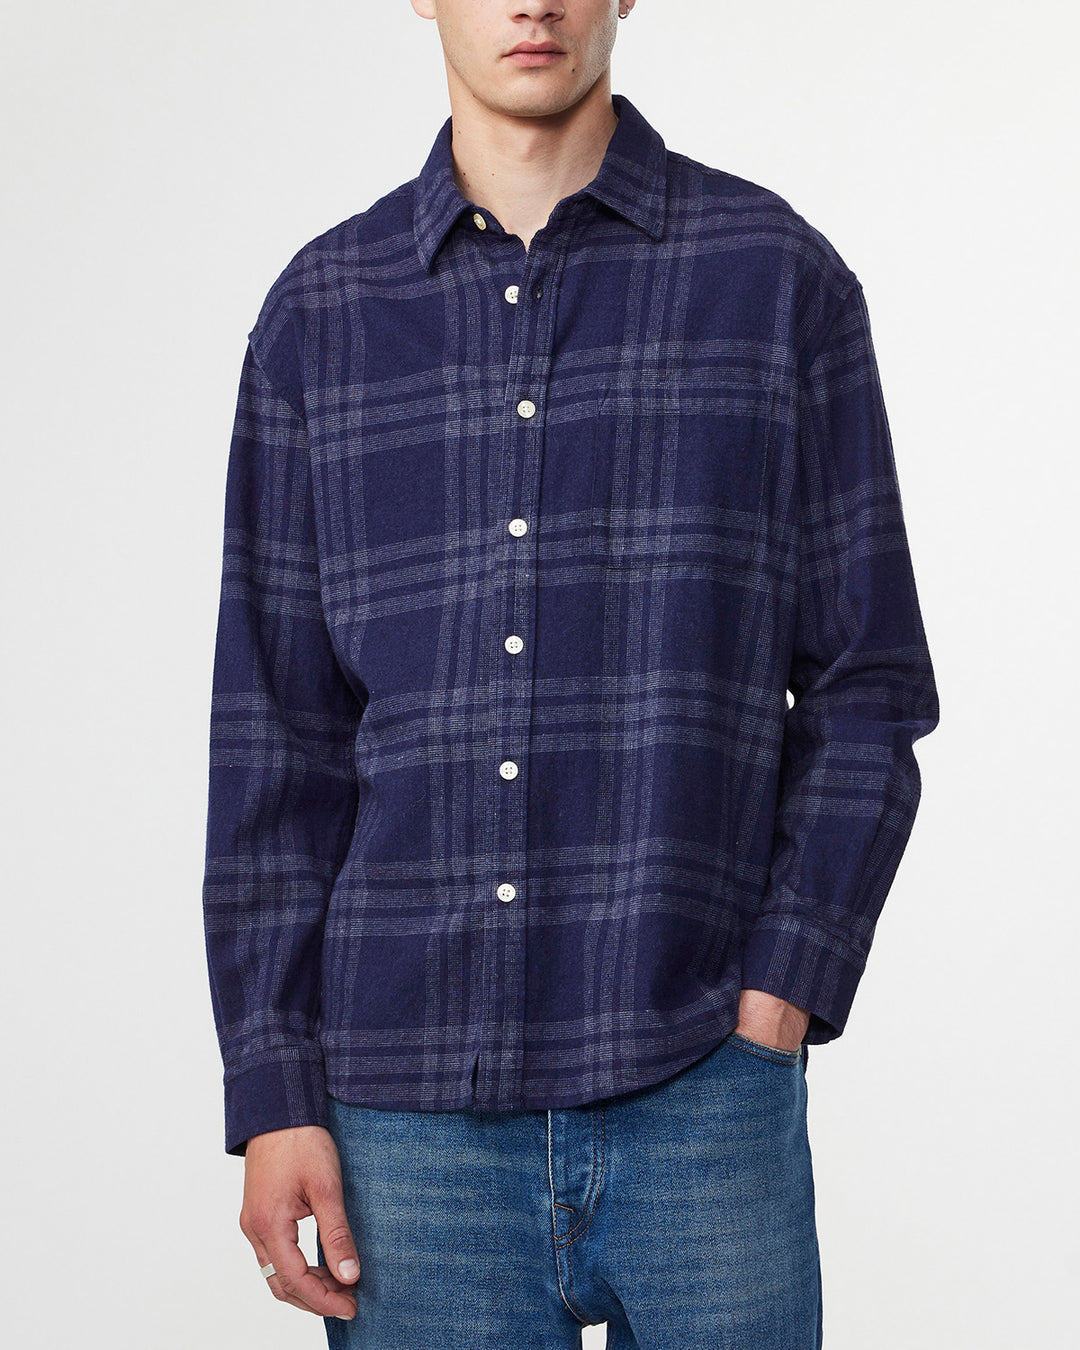 NN07 - Deon 5465 Cotton Flannel Shirt in Navy Check | Buster McGee